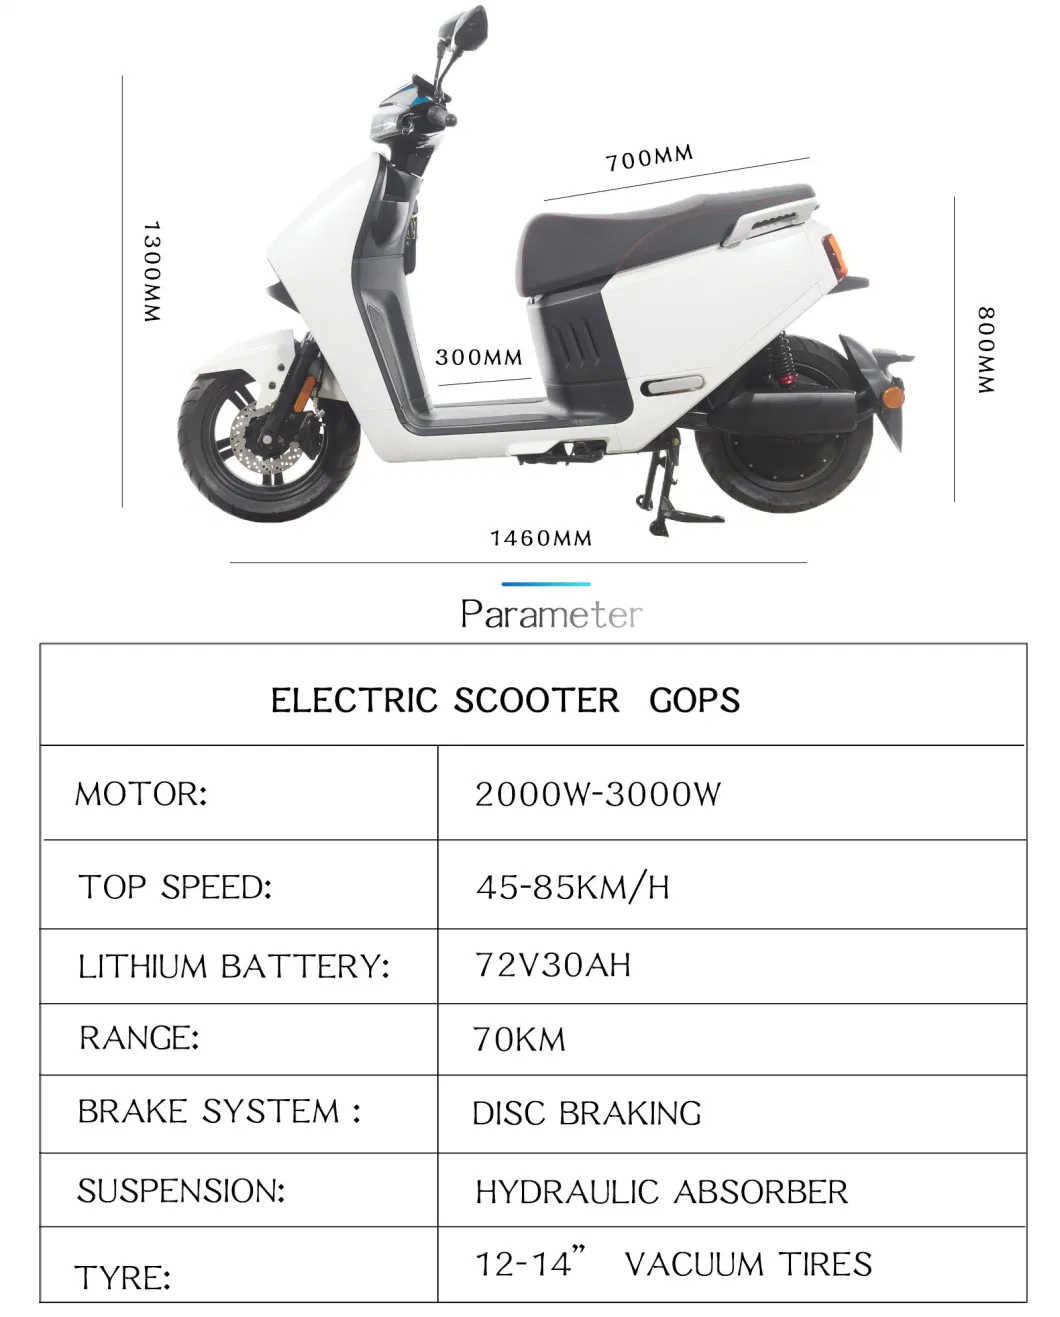 High Power City Bike Top Speed 85km/H Electric Scooter